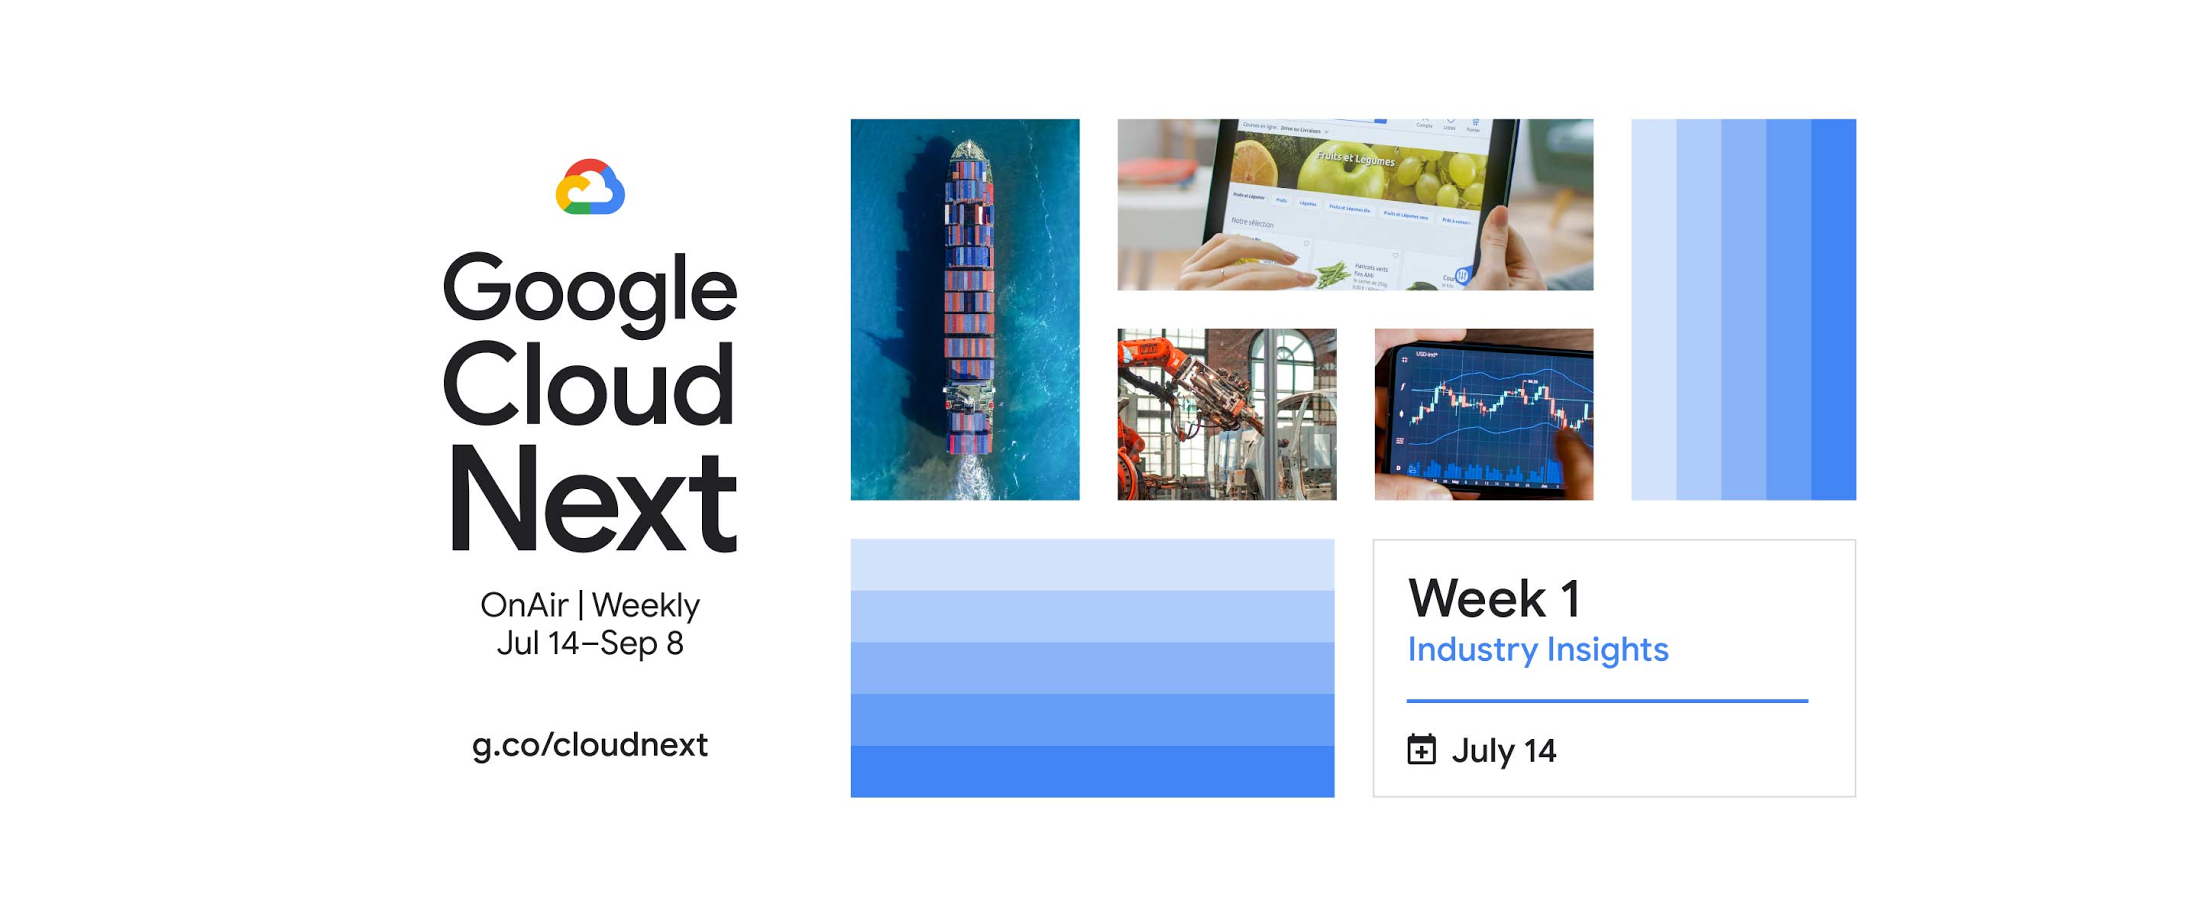 Everything you need to know about week 1 of Google Cloud Next ‘20: OnAir